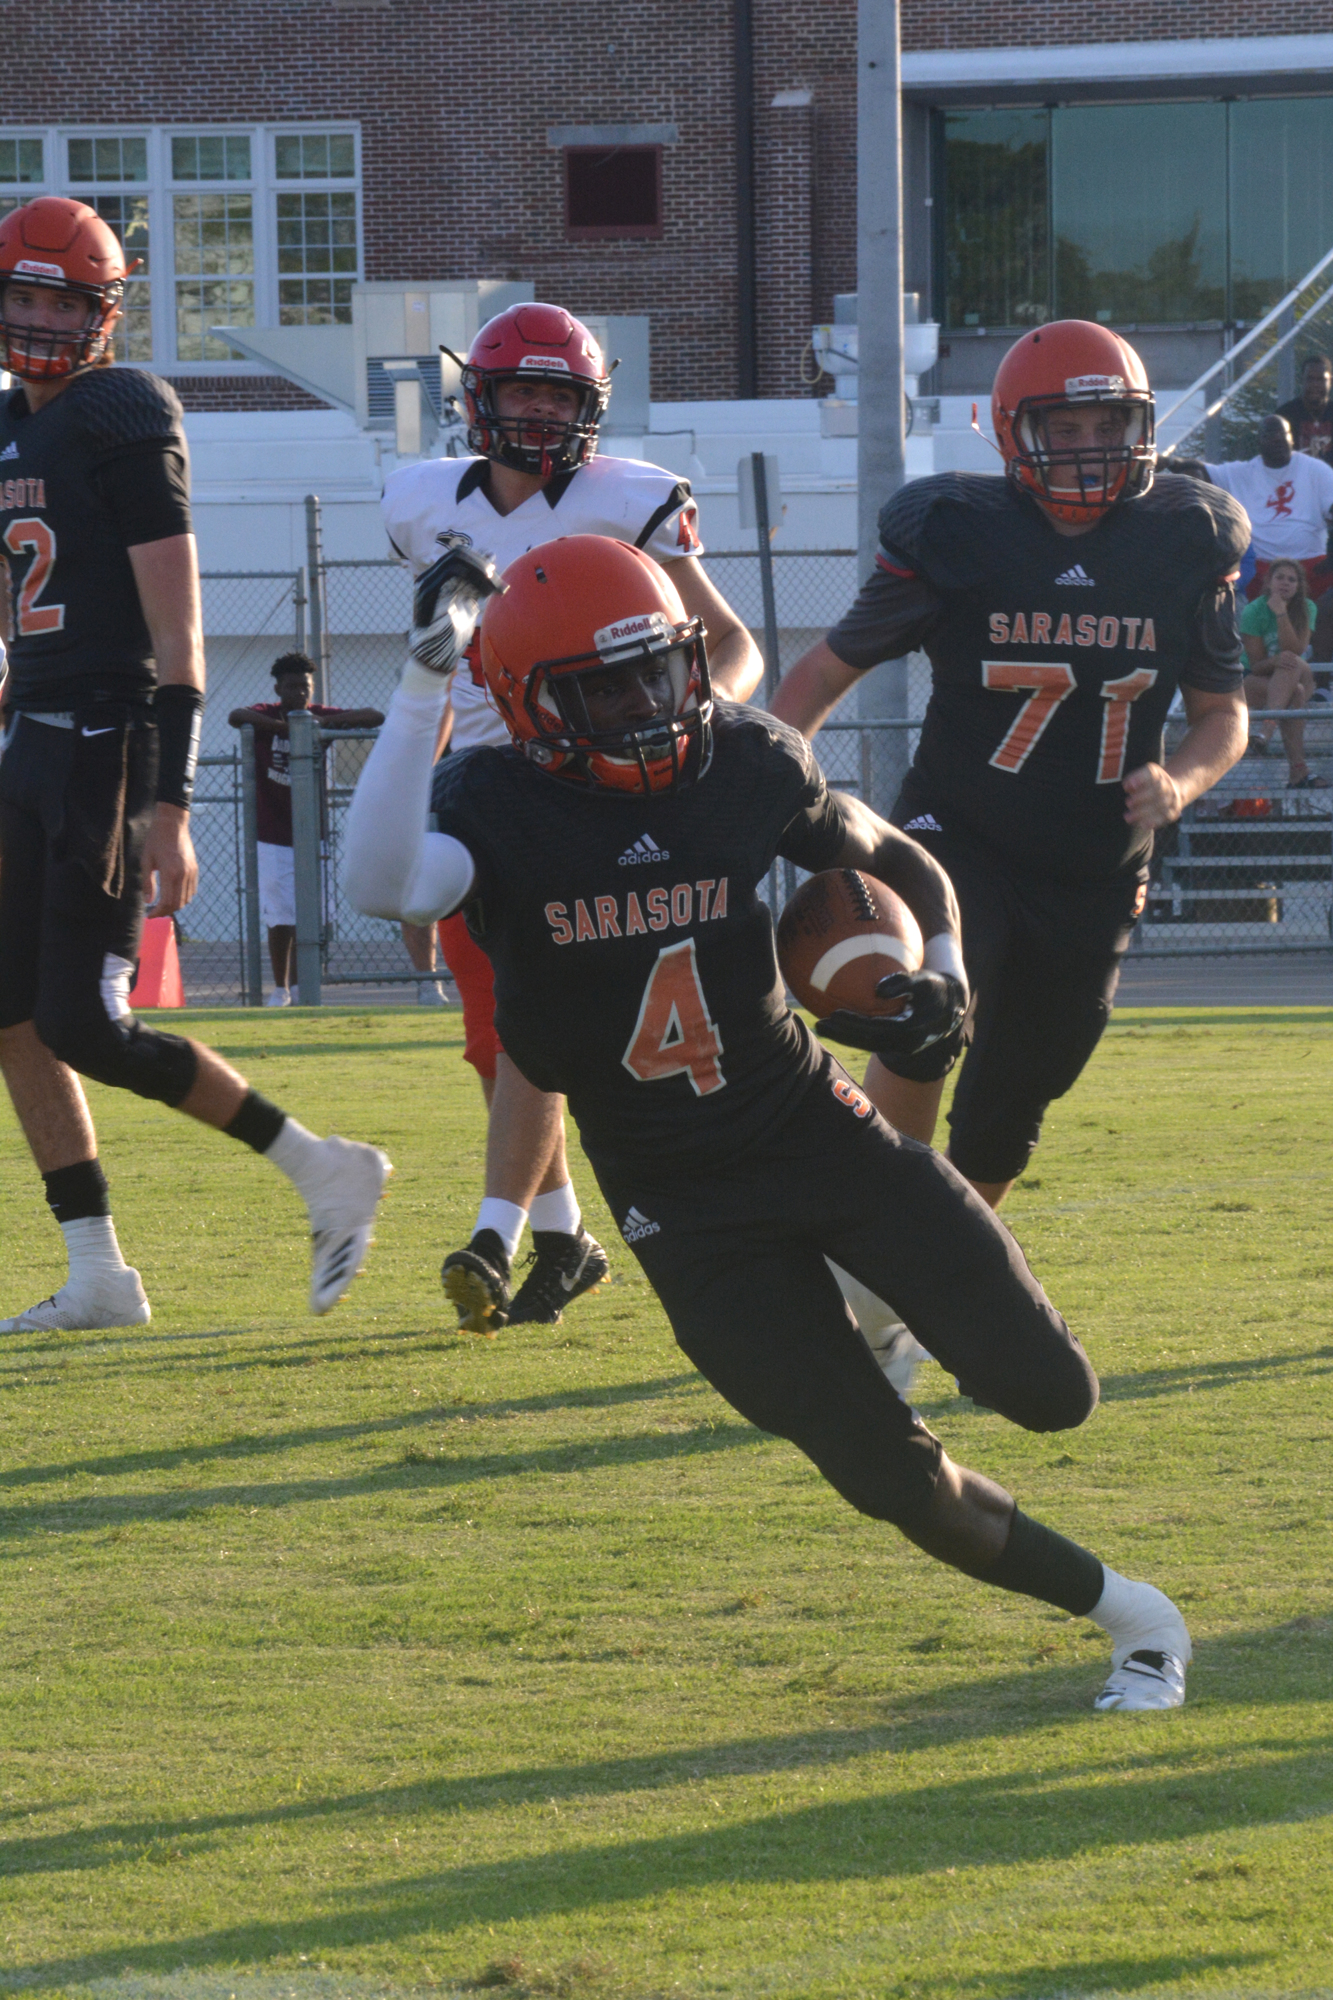 Sarasota wideout Ke'Andre Collins (4) had two touchdowns against the Cougars.